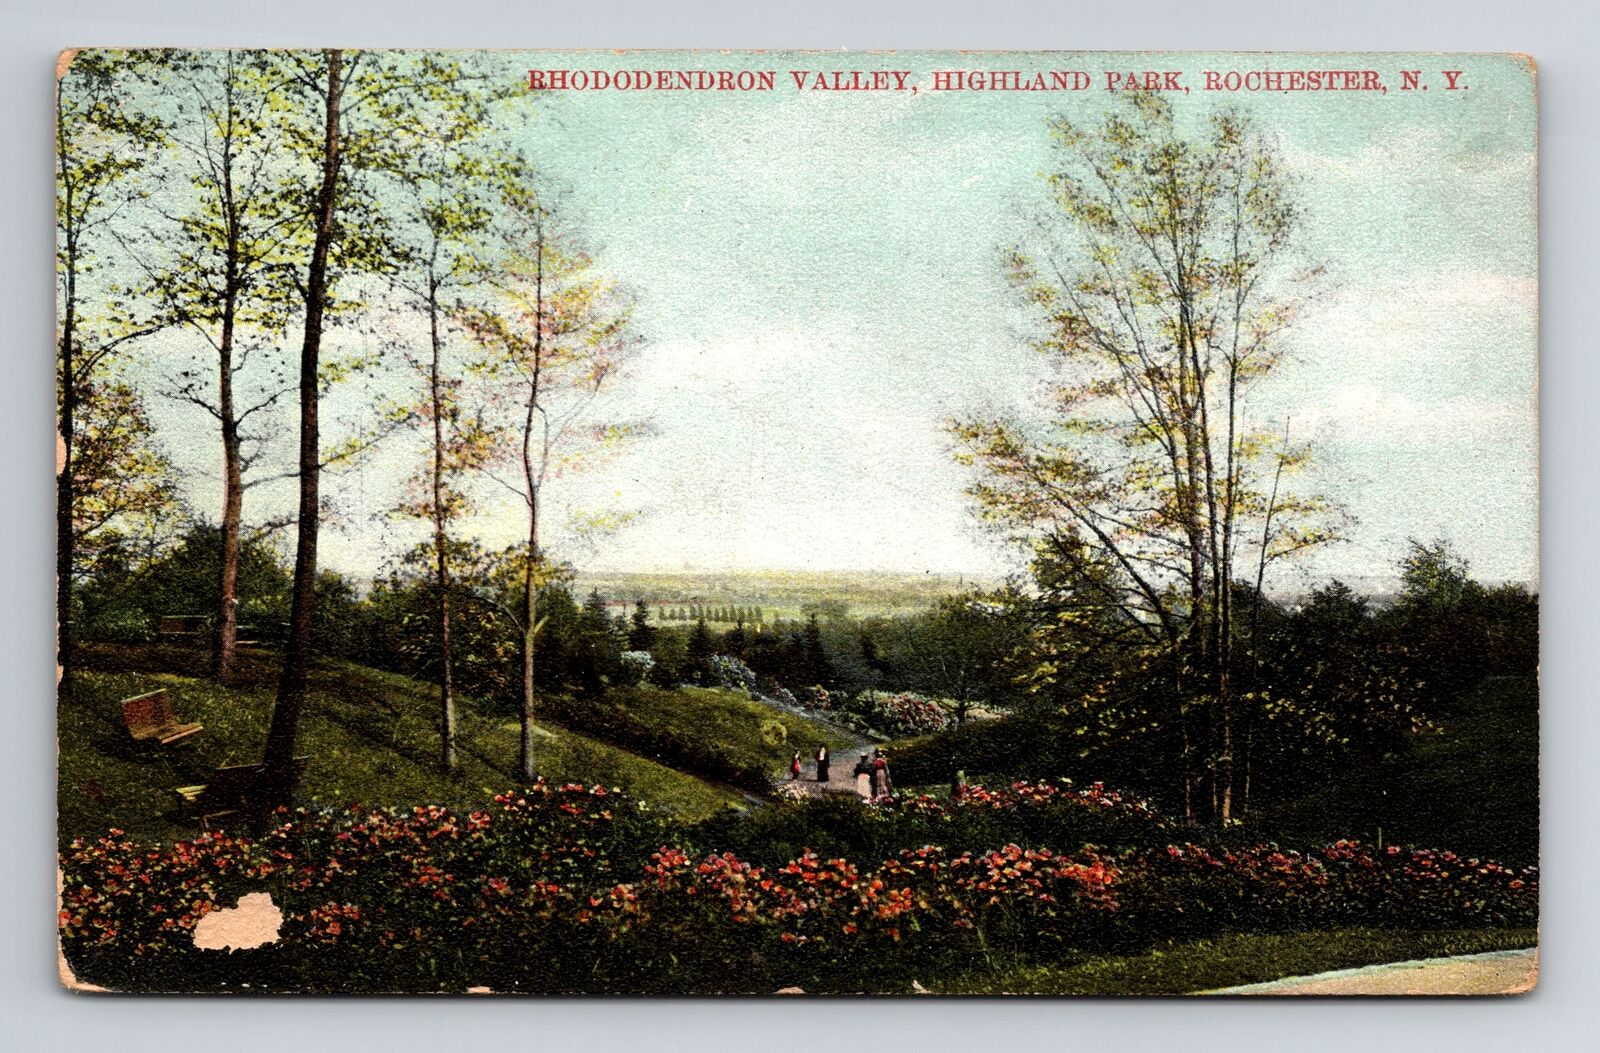 Rochester NY-New York, Highland Park, Rhododendron Valley, Vintage Postcard